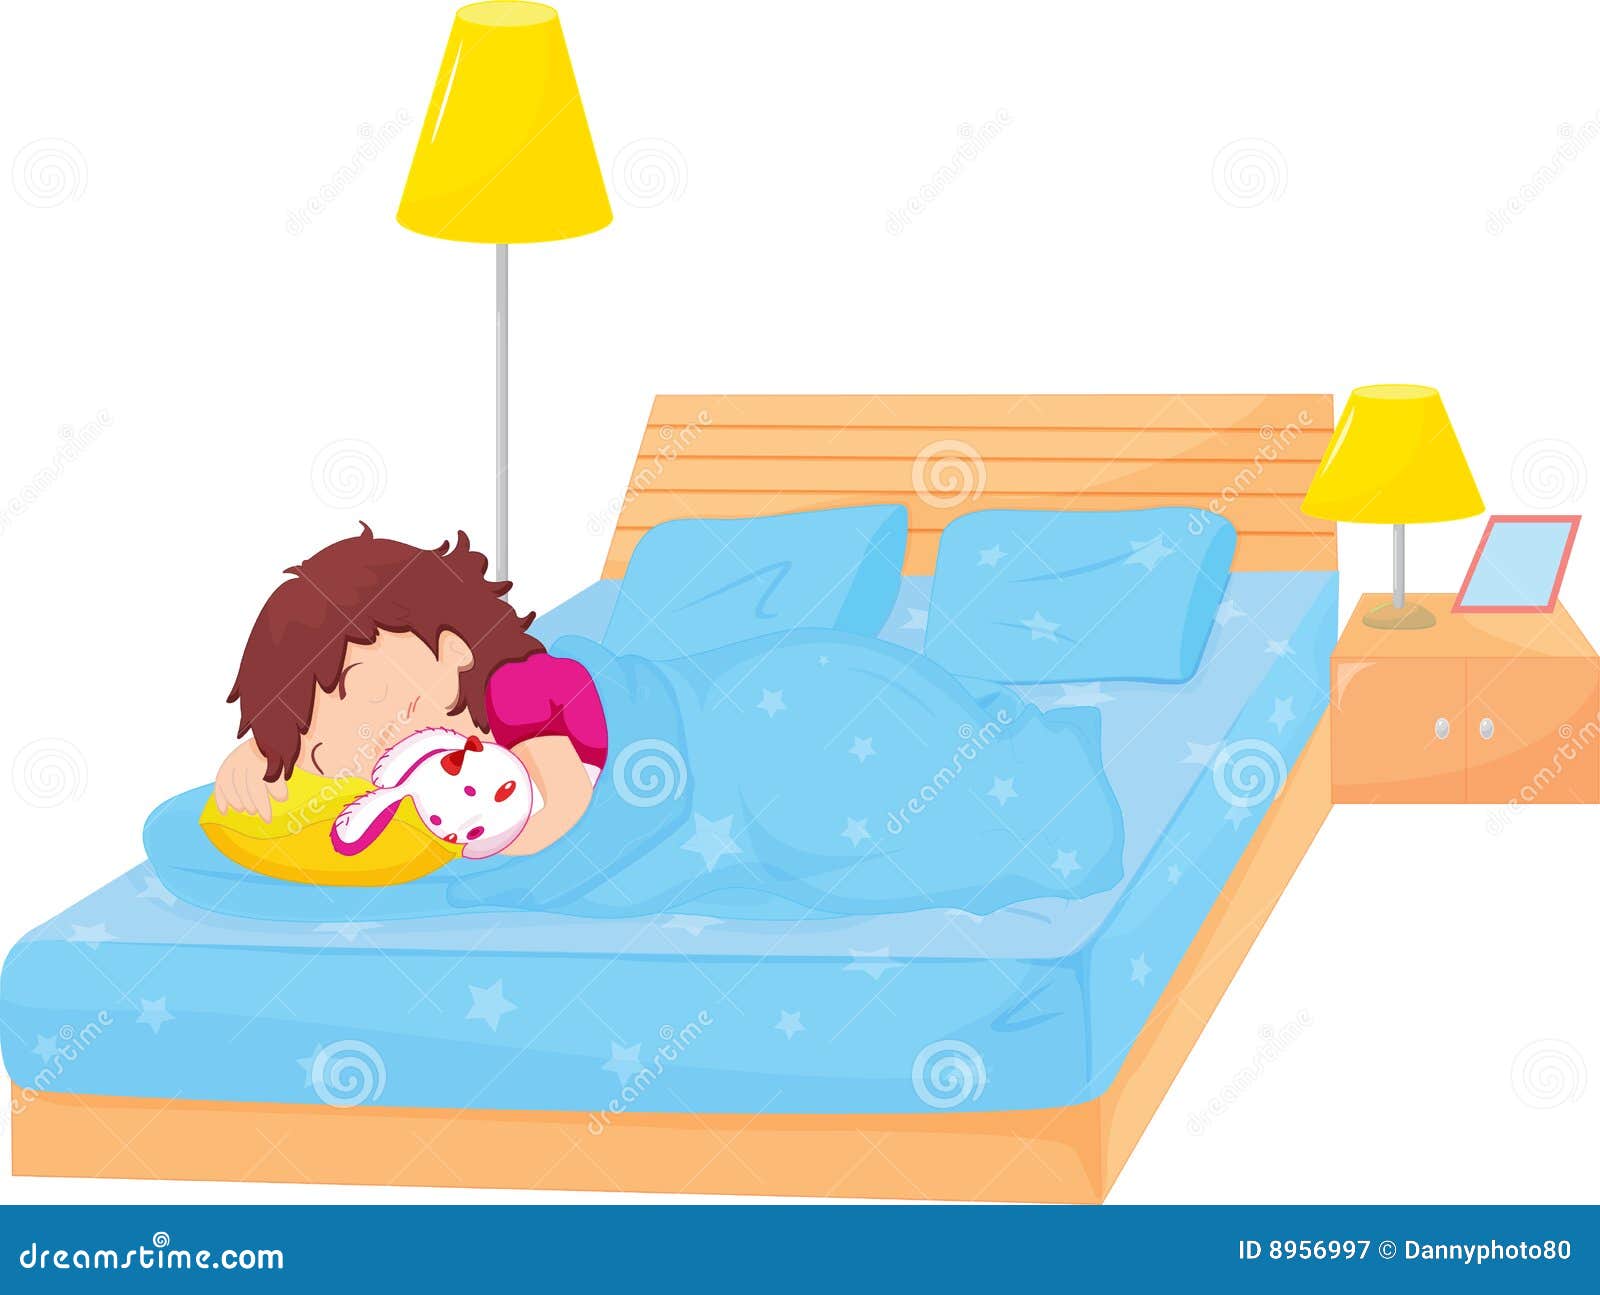 clipart girl in bed - photo #3